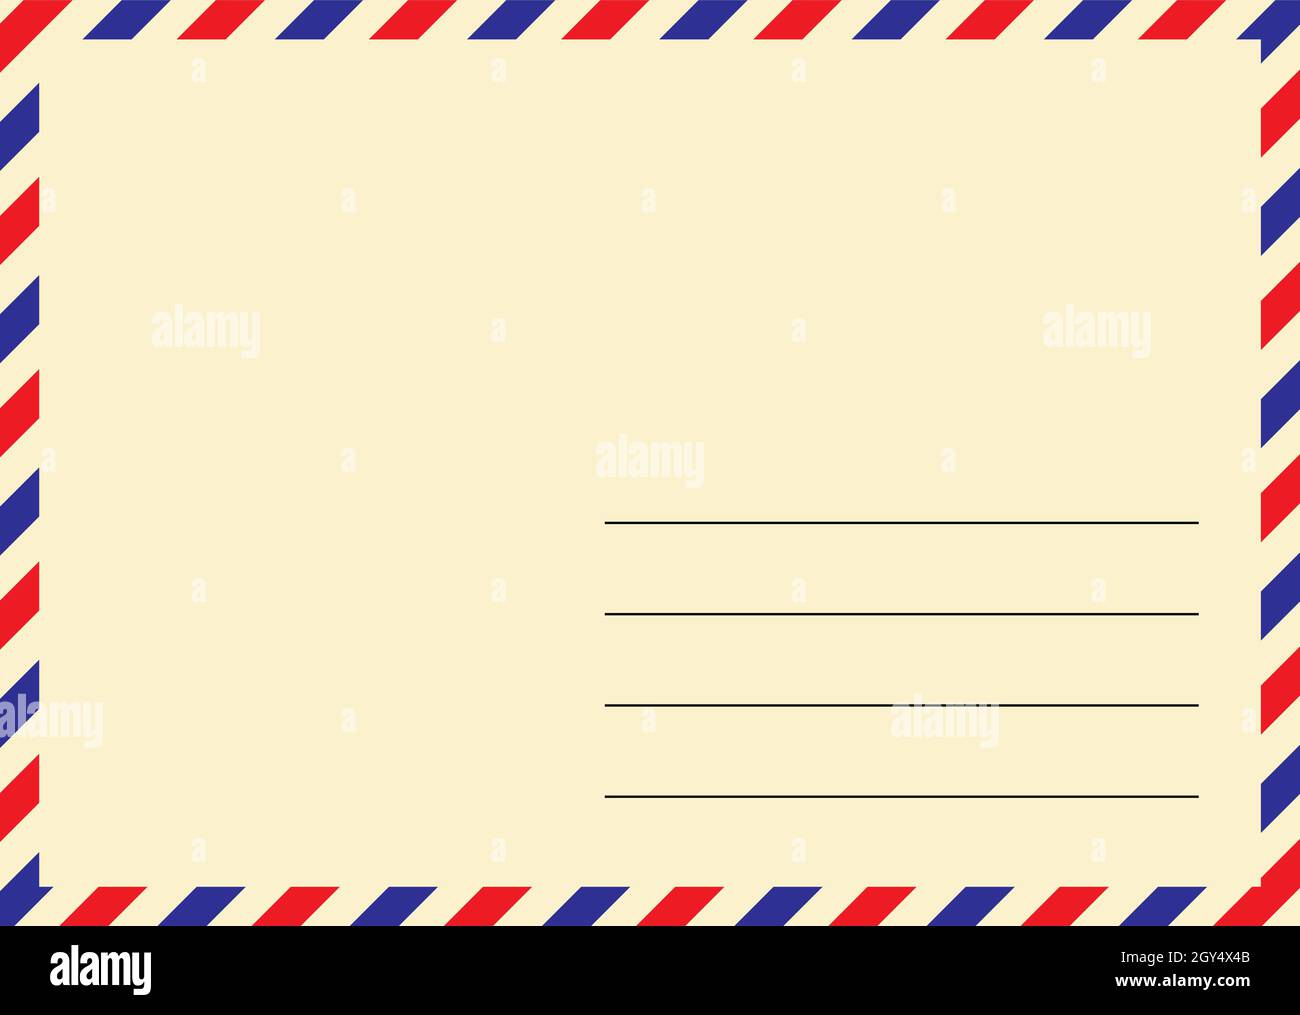 Airmail envelope. Old yellow postcard with diagonal stripes in red and blue color.  Vector illustration template with empty address space. Stock Vector